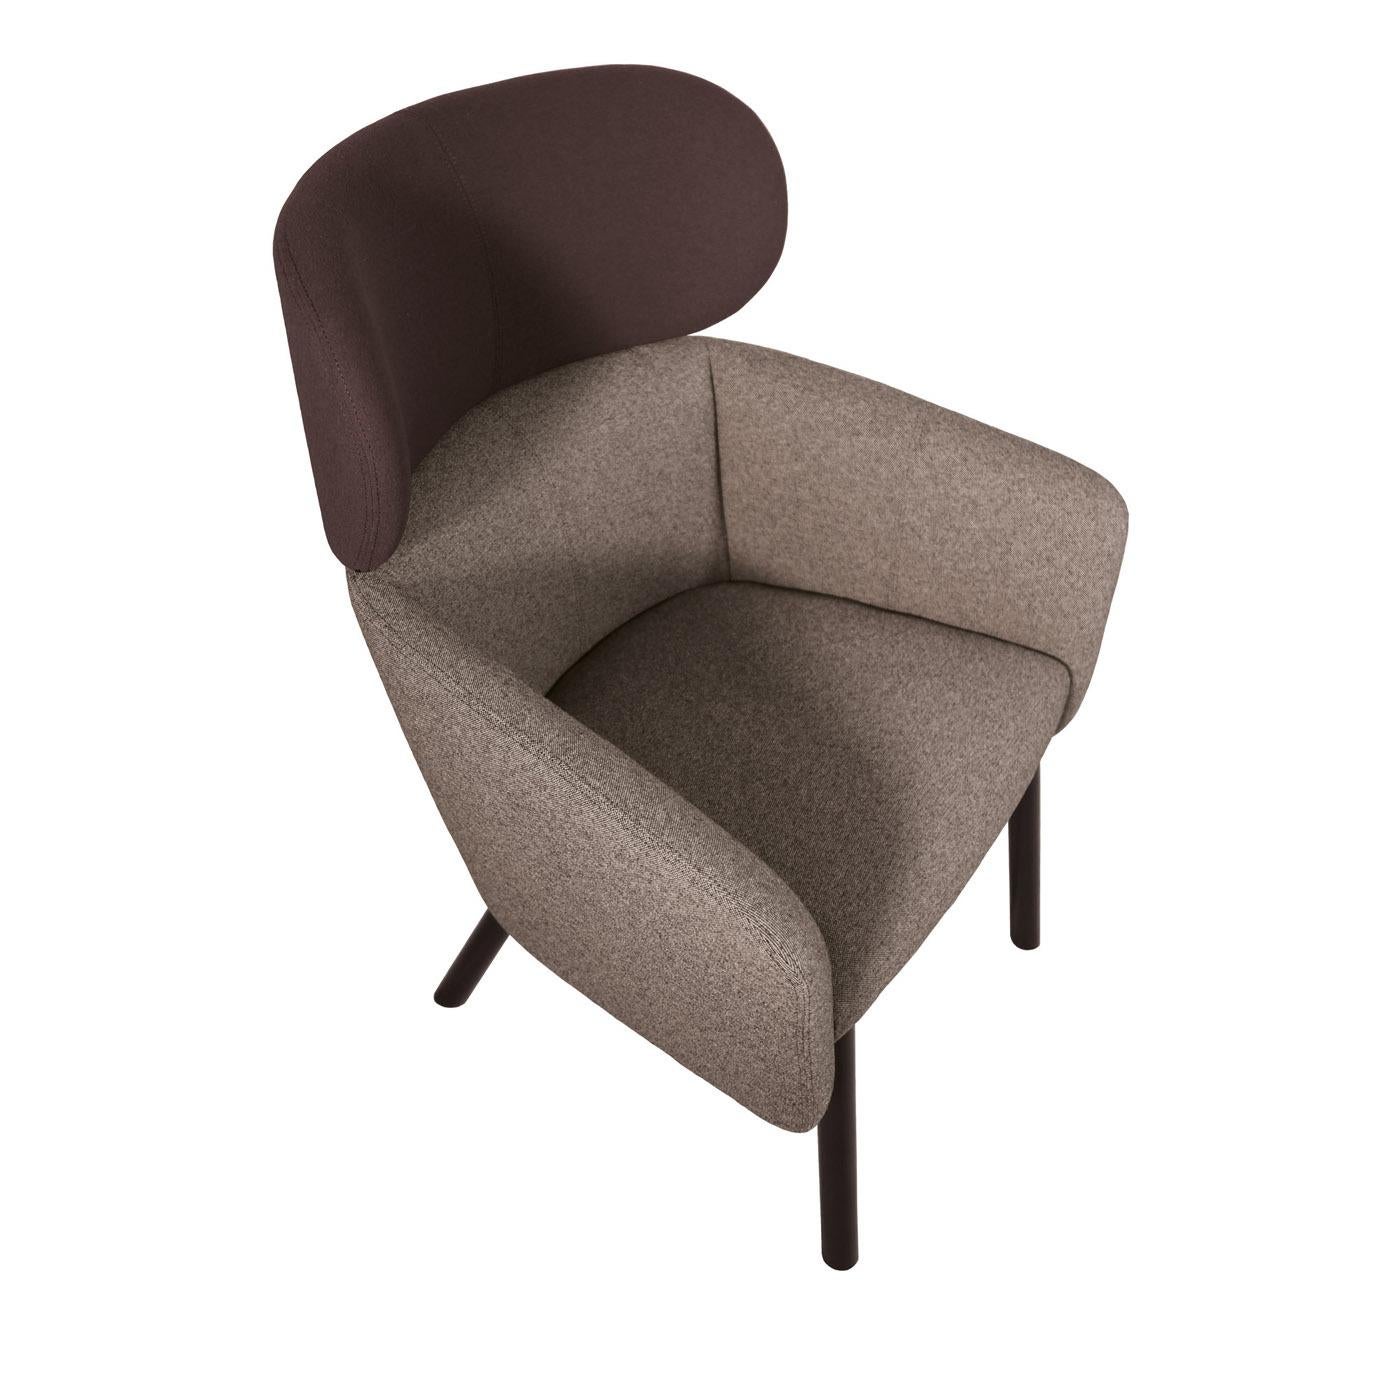 Balù Lounge Brown Armchair by Emilio Nanni In New Condition For Sale In Milan, IT